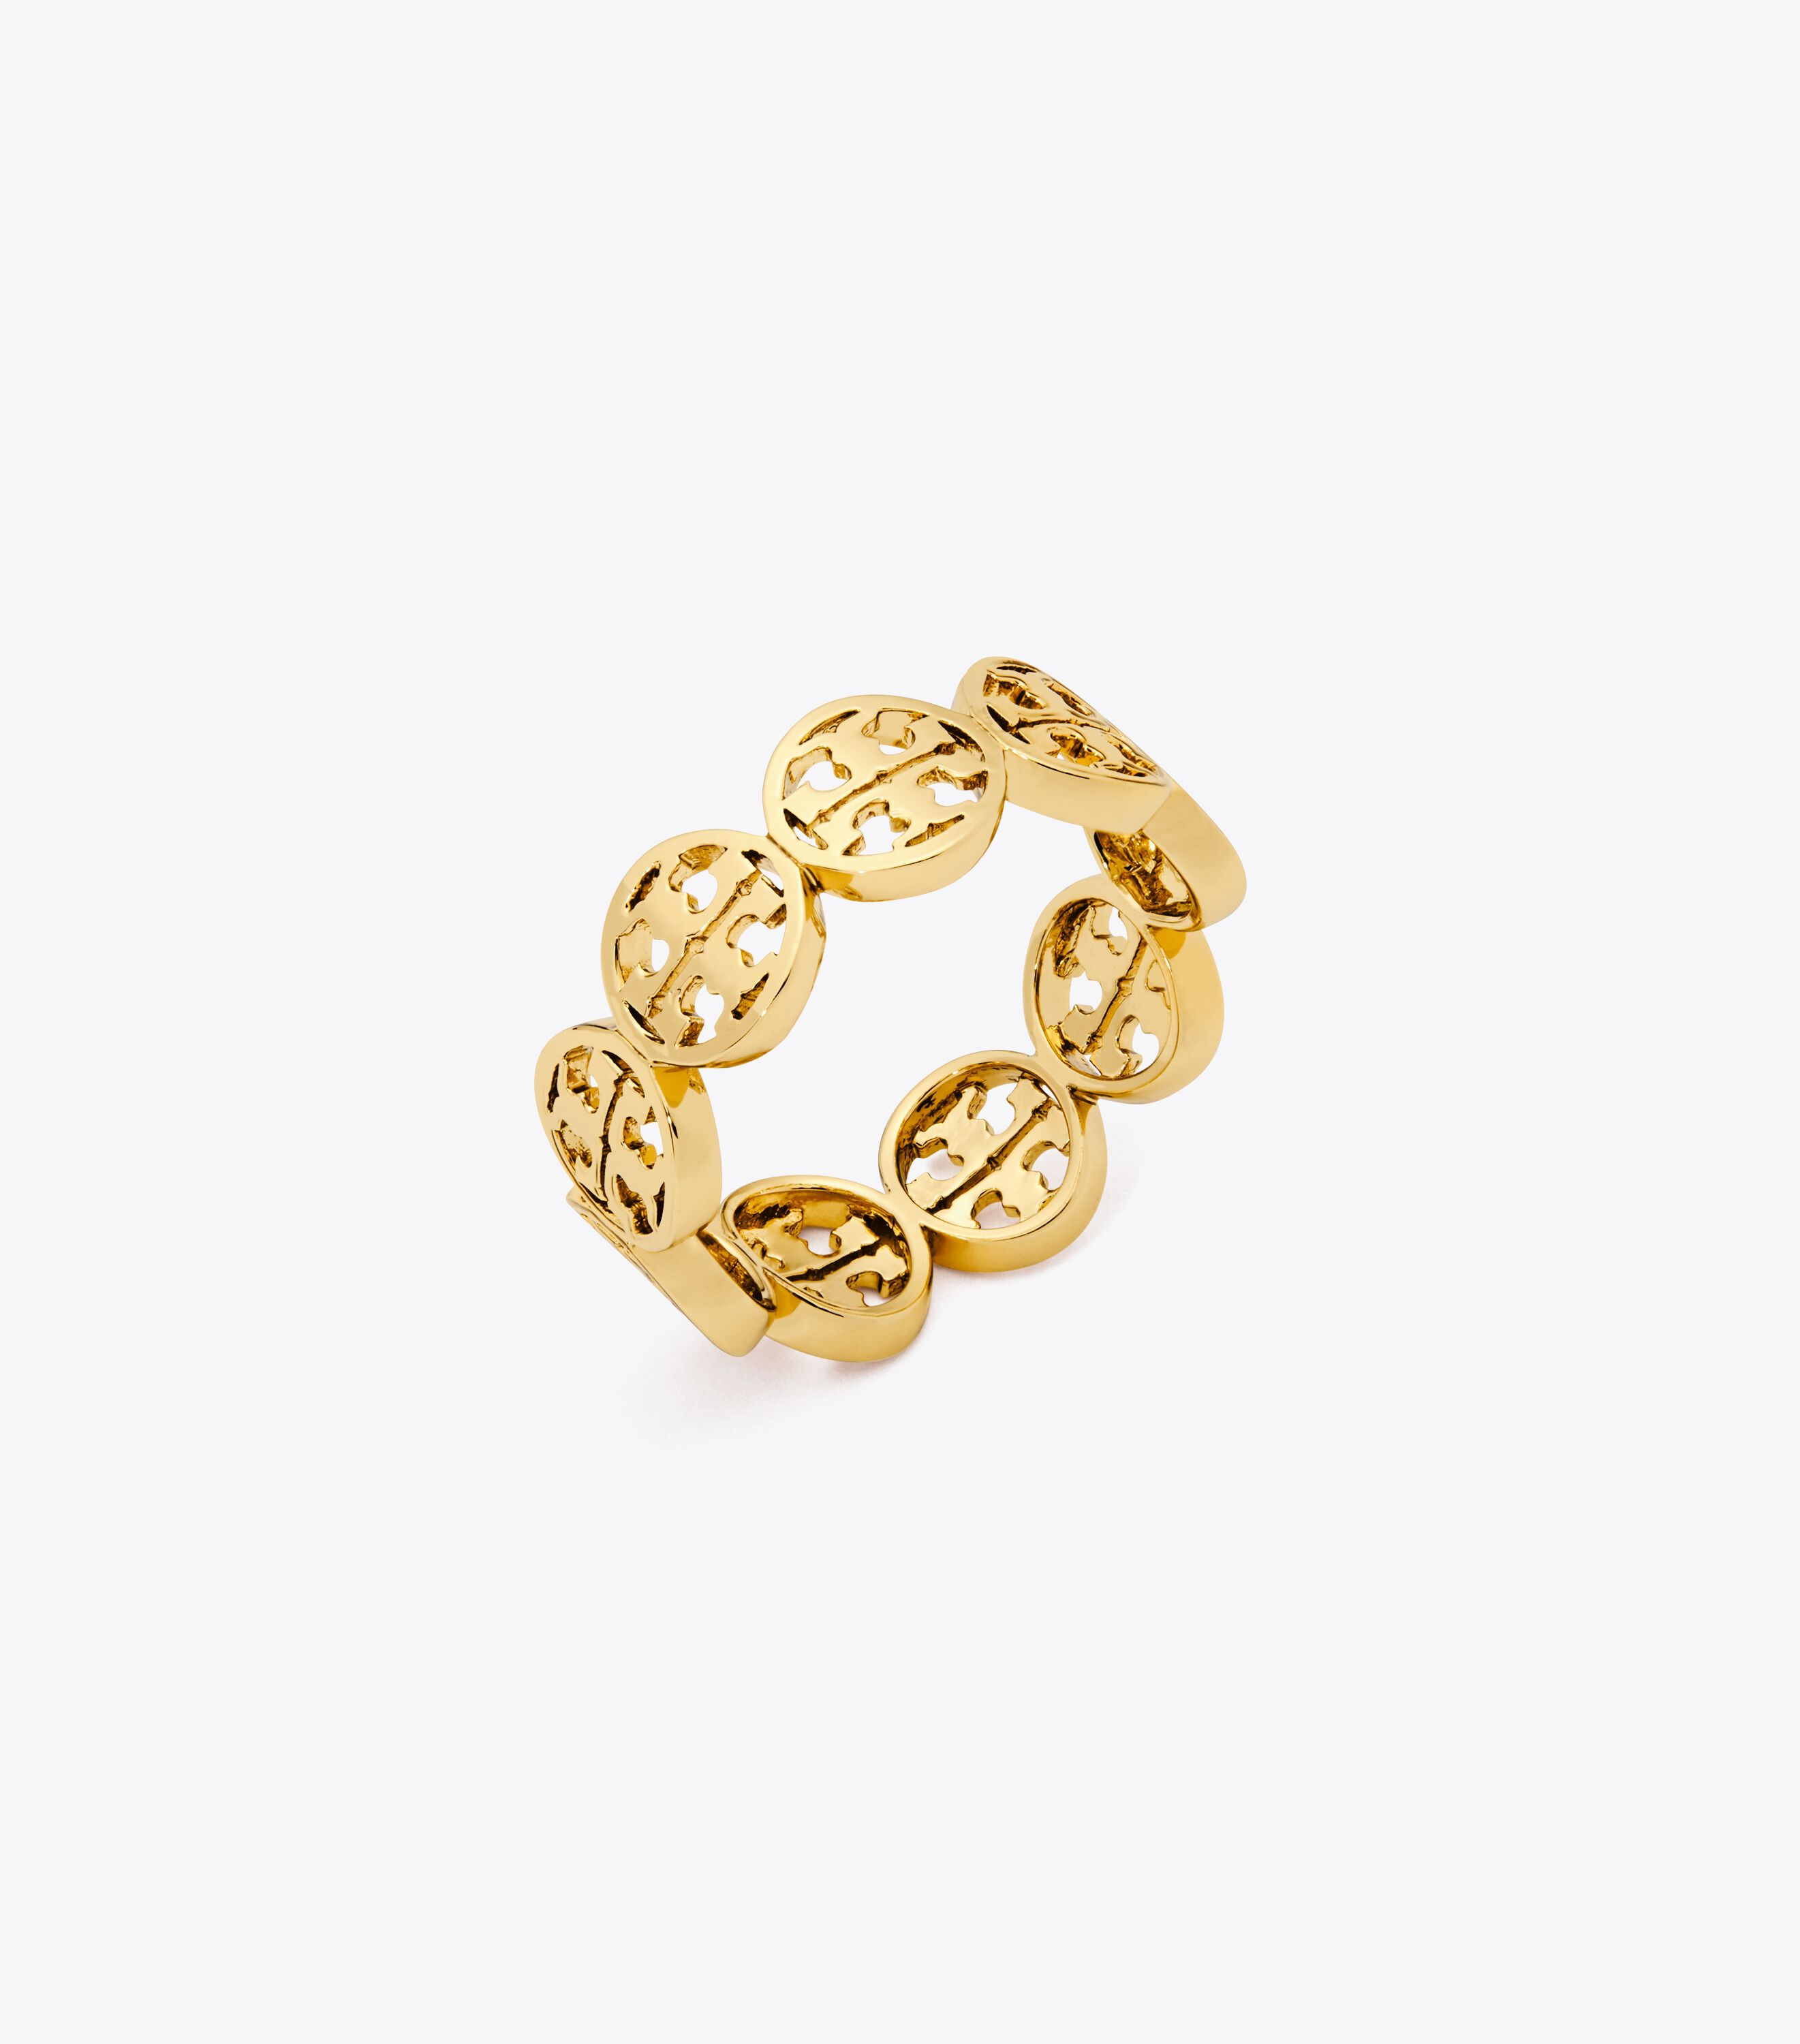 TORY BURCH Ring MILLER in gold